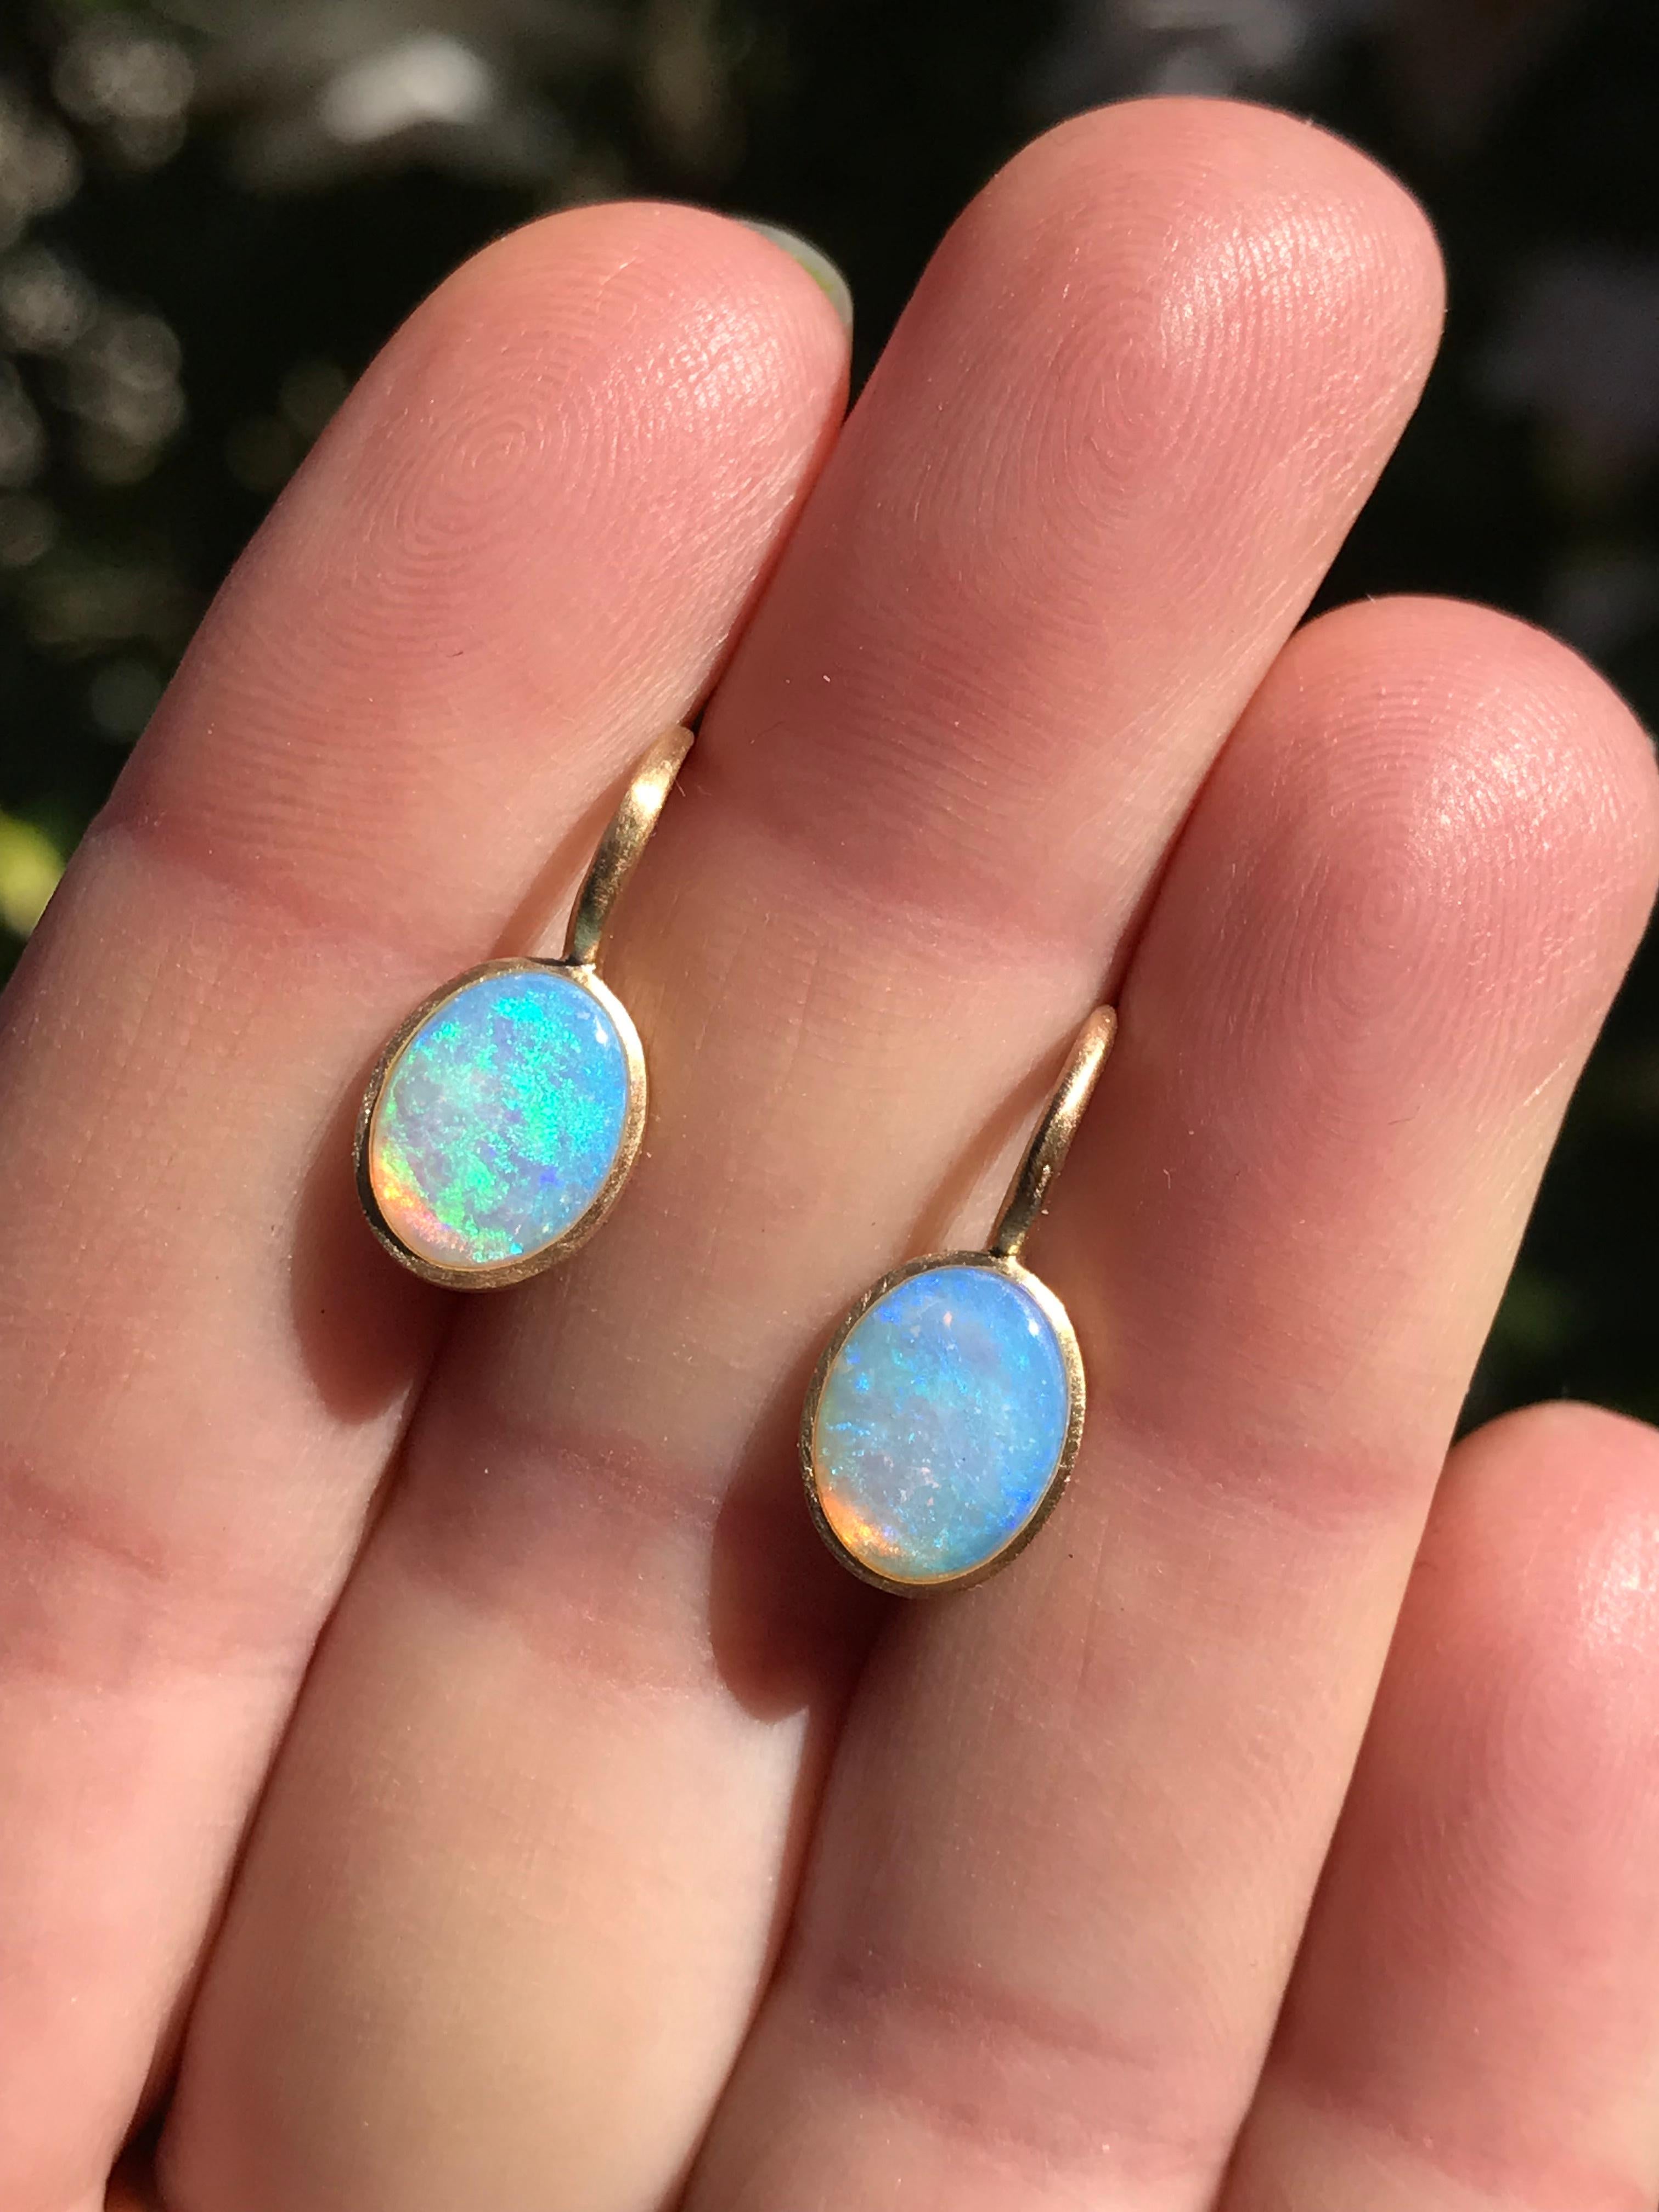 Dalben design  18k yellow gold matte finishing small earrings with two bezel-set oval cabochon blue Australian solid opals weight 1,6 carats . 
Bezel stone dimensions :
width 8 mm
height without leverback 10 mm
height with leverback 18 mm
The